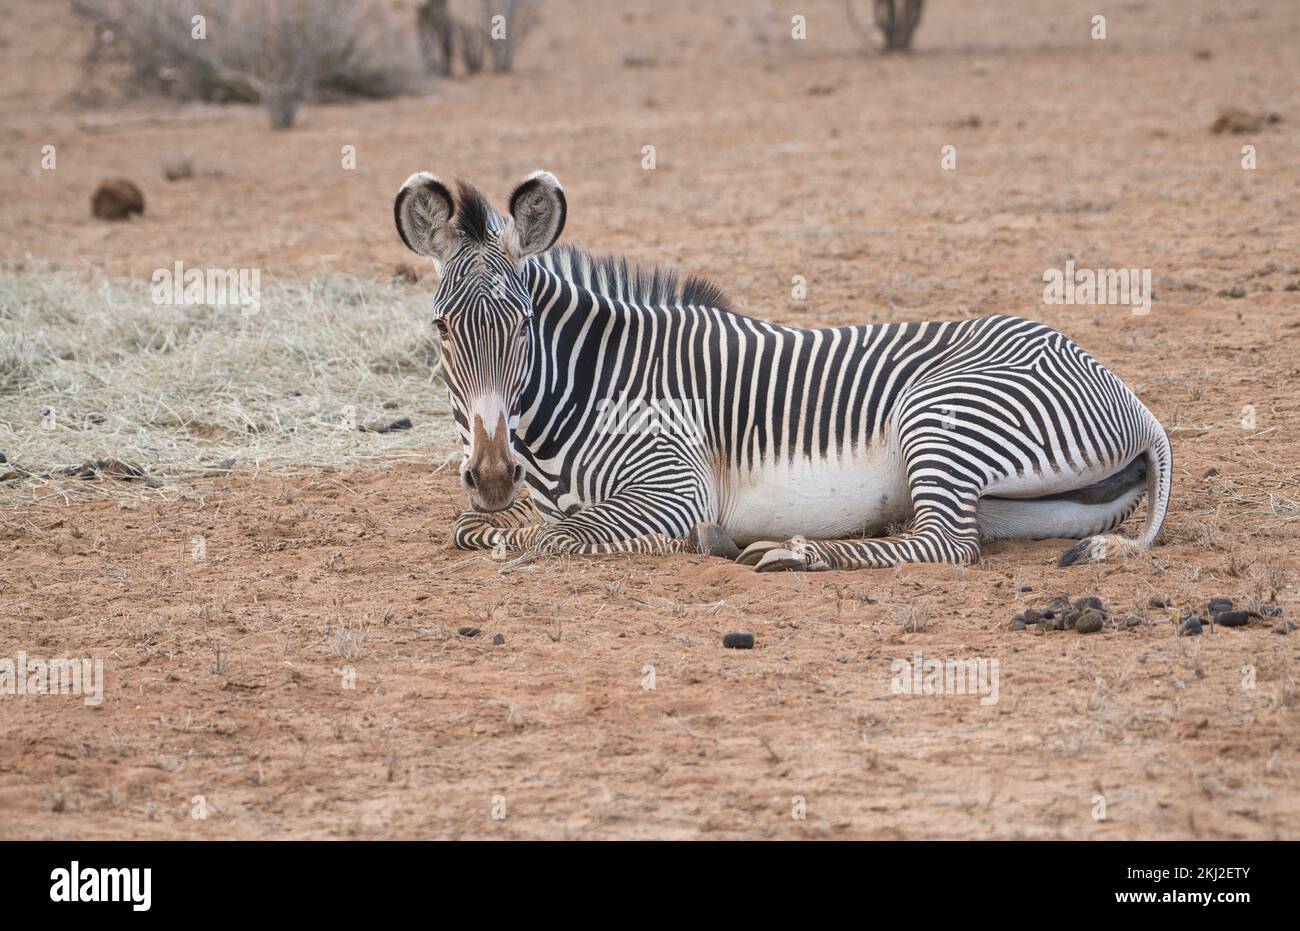 Grevy's zebra (Equus grevyi) Resting and digesting after eating hay put out during a drought in Samburu National Reserve, Kenya Stock Photo